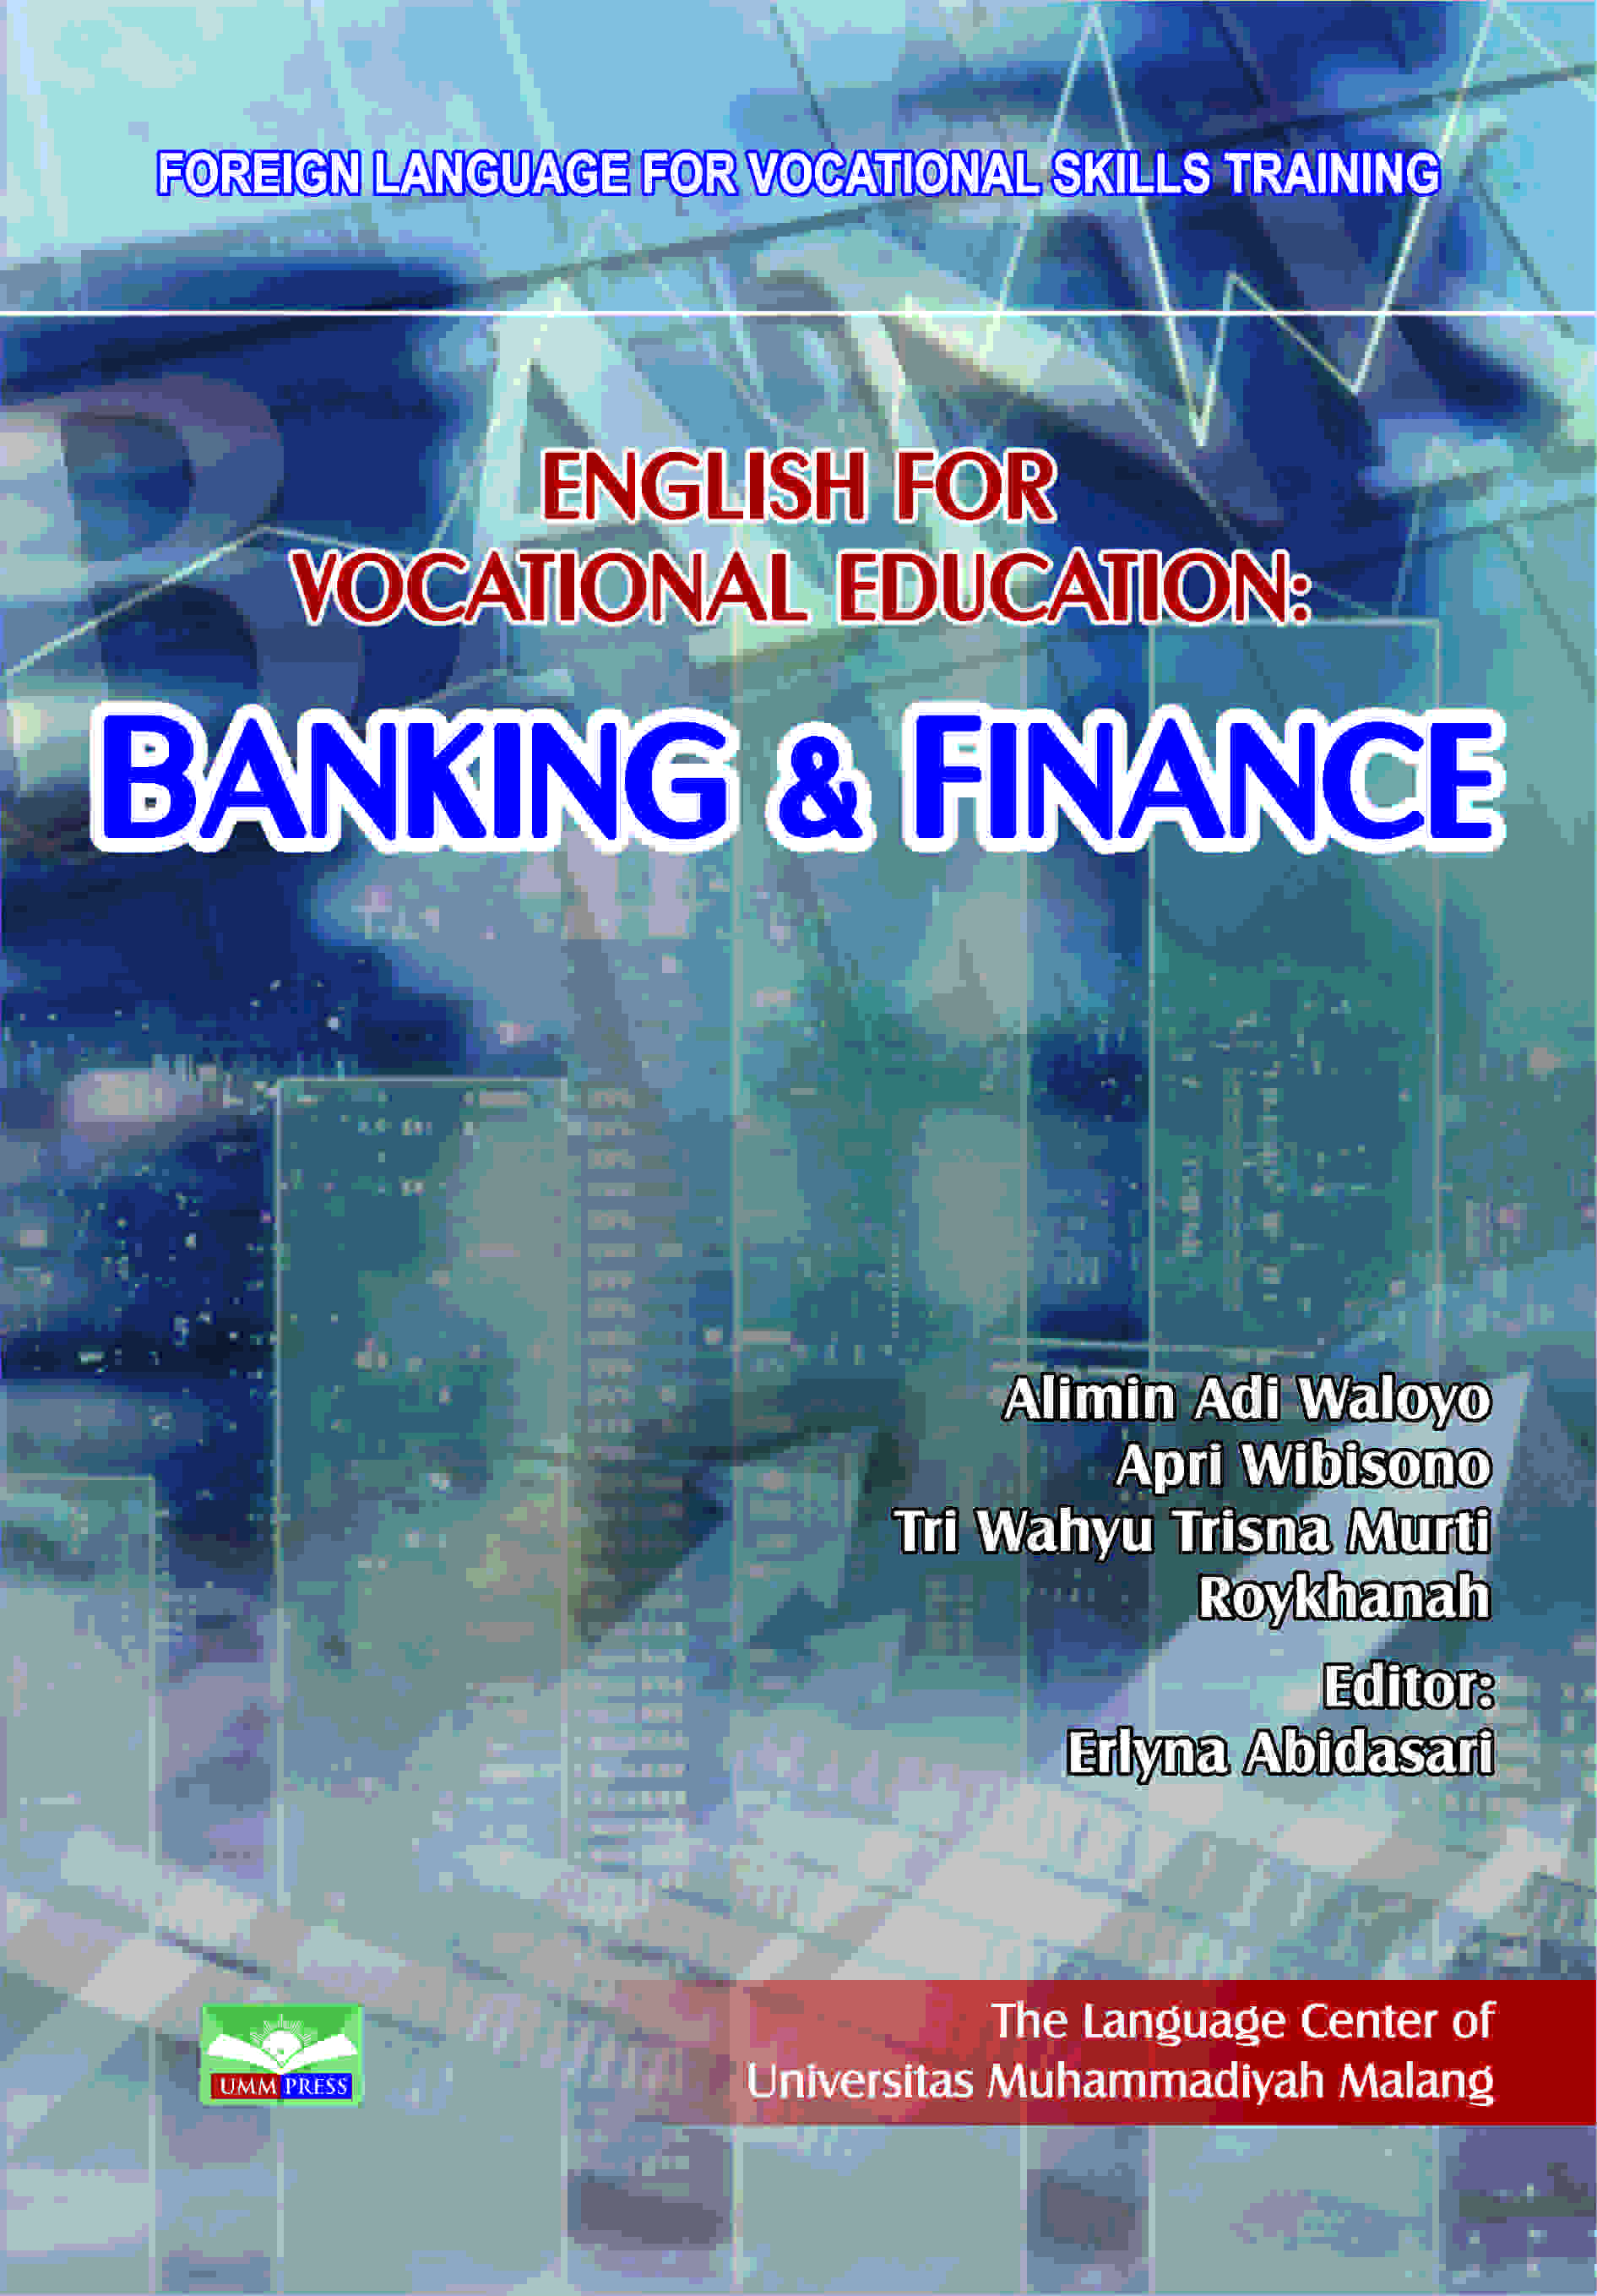 FLVST - ENGLISH FOR VOCATIONAL EDUCATION BANKING AND FINANCE